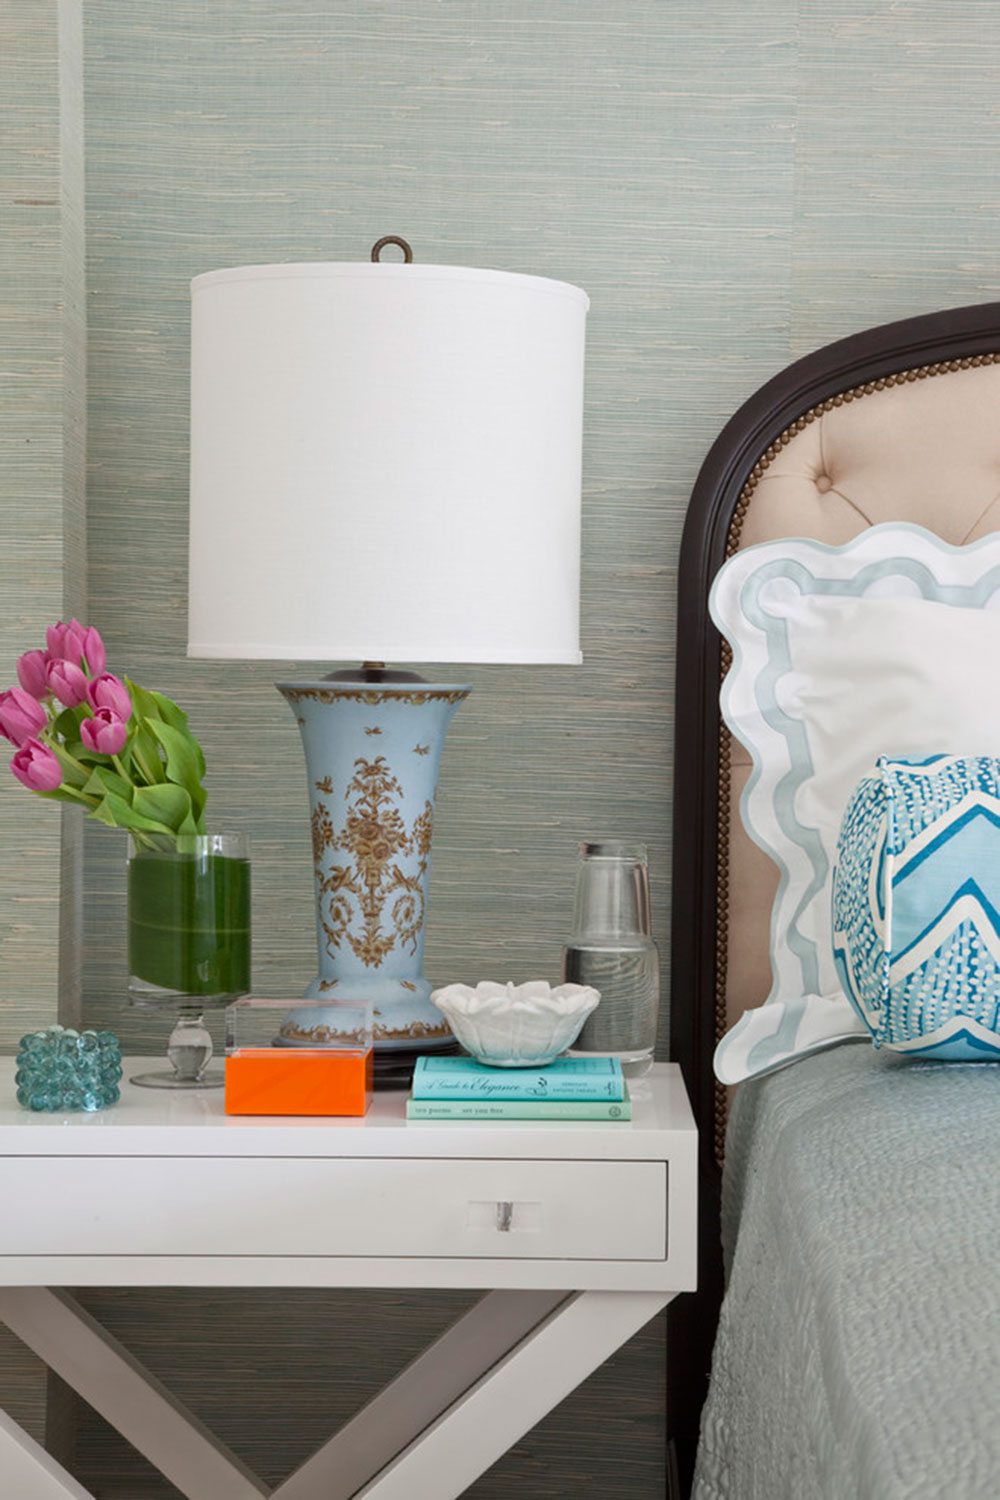 Emily-Ruddo-Design-by-Emily-Ruddo Cool bedside table ideas to try in your bedroom